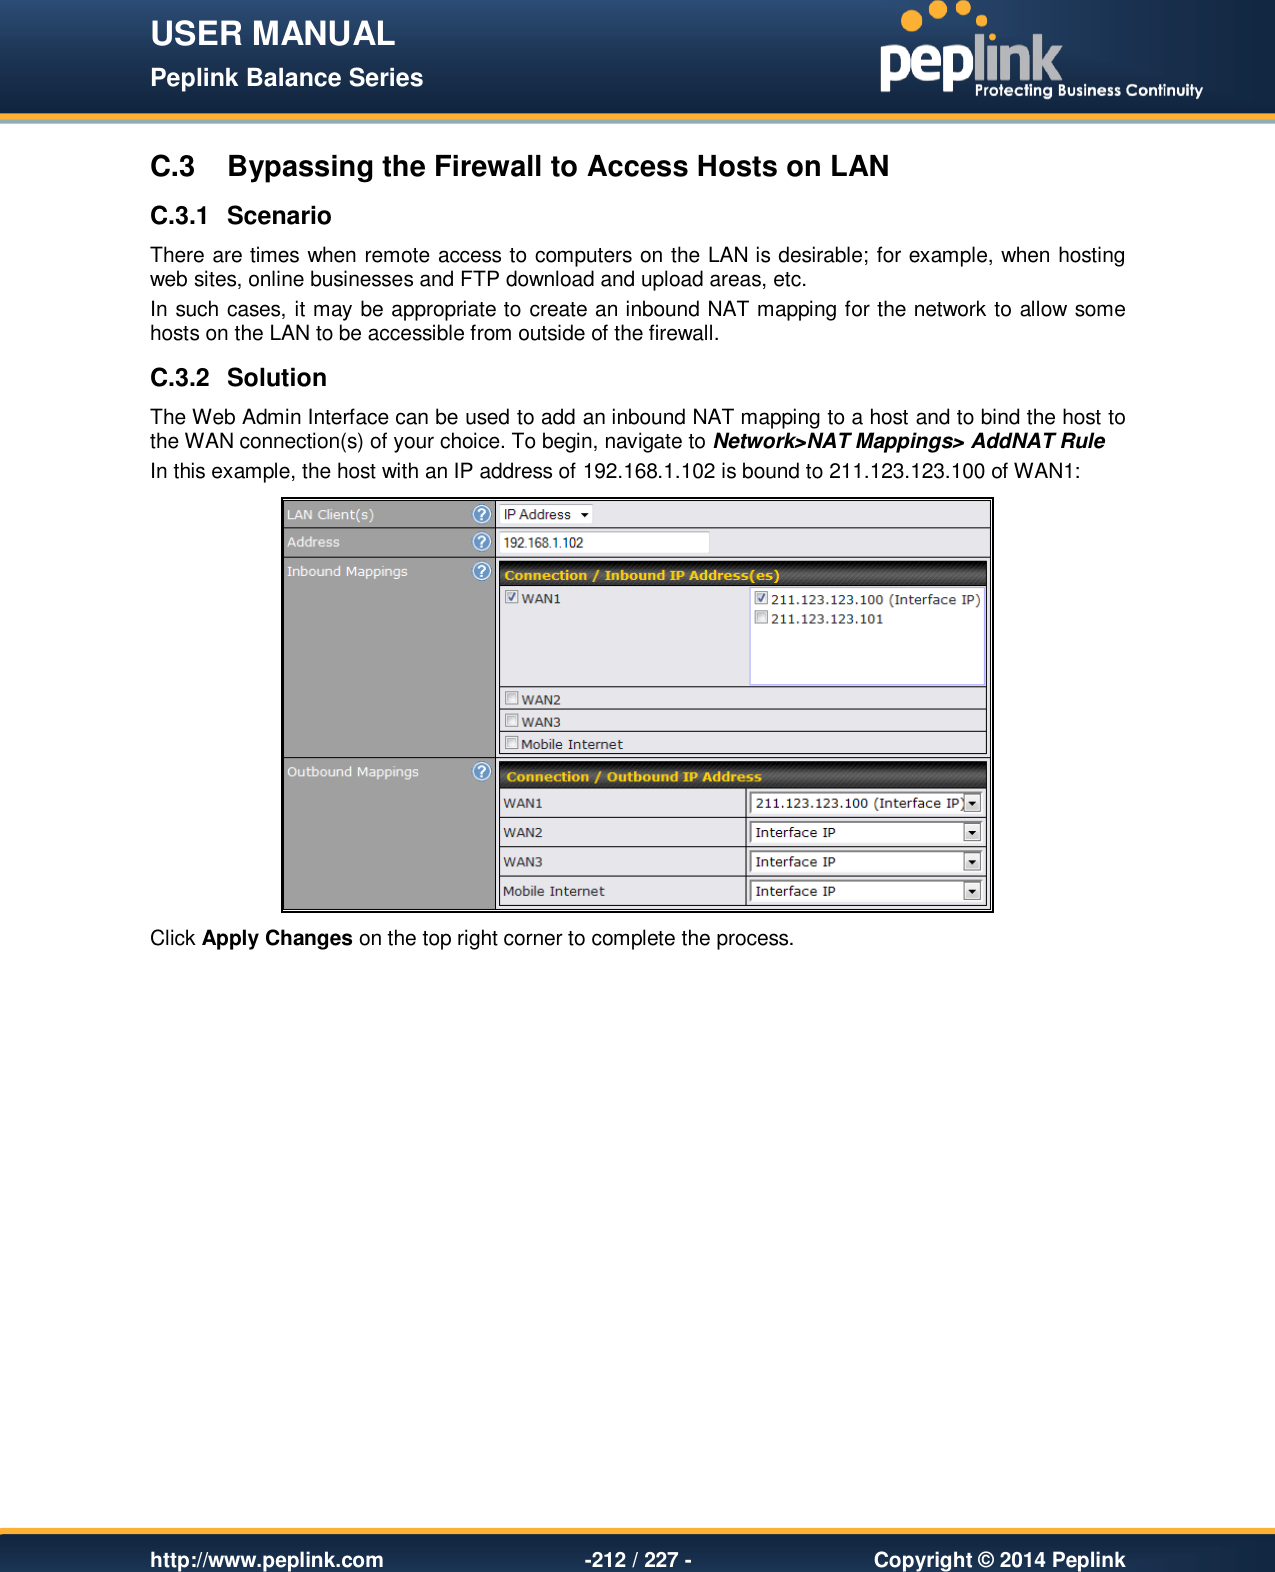 USER MANUAL Peplink Balance Series   http://www.peplink.com -212 / 227 -  Copyright © 2014 Peplink C.3  Bypassing the Firewall to Access Hosts on LAN C.3.1  Scenario There are times when remote access to computers on the LAN is desirable; for example, when hosting web sites, online businesses and FTP download and upload areas, etc. In such cases, it may be appropriate to create an inbound NAT mapping for the network to allow some hosts on the LAN to be accessible from outside of the firewall. C.3.2  Solution The Web Admin Interface can be used to add an inbound NAT mapping to a host and to bind the host to the WAN connection(s) of your choice. To begin, navigate to Network&gt;NAT Mappings&gt; AddNAT Rule In this example, the host with an IP address of 192.168.1.102 is bound to 211.123.123.100 of WAN1:  Click Apply Changes on the top right corner to complete the process.  